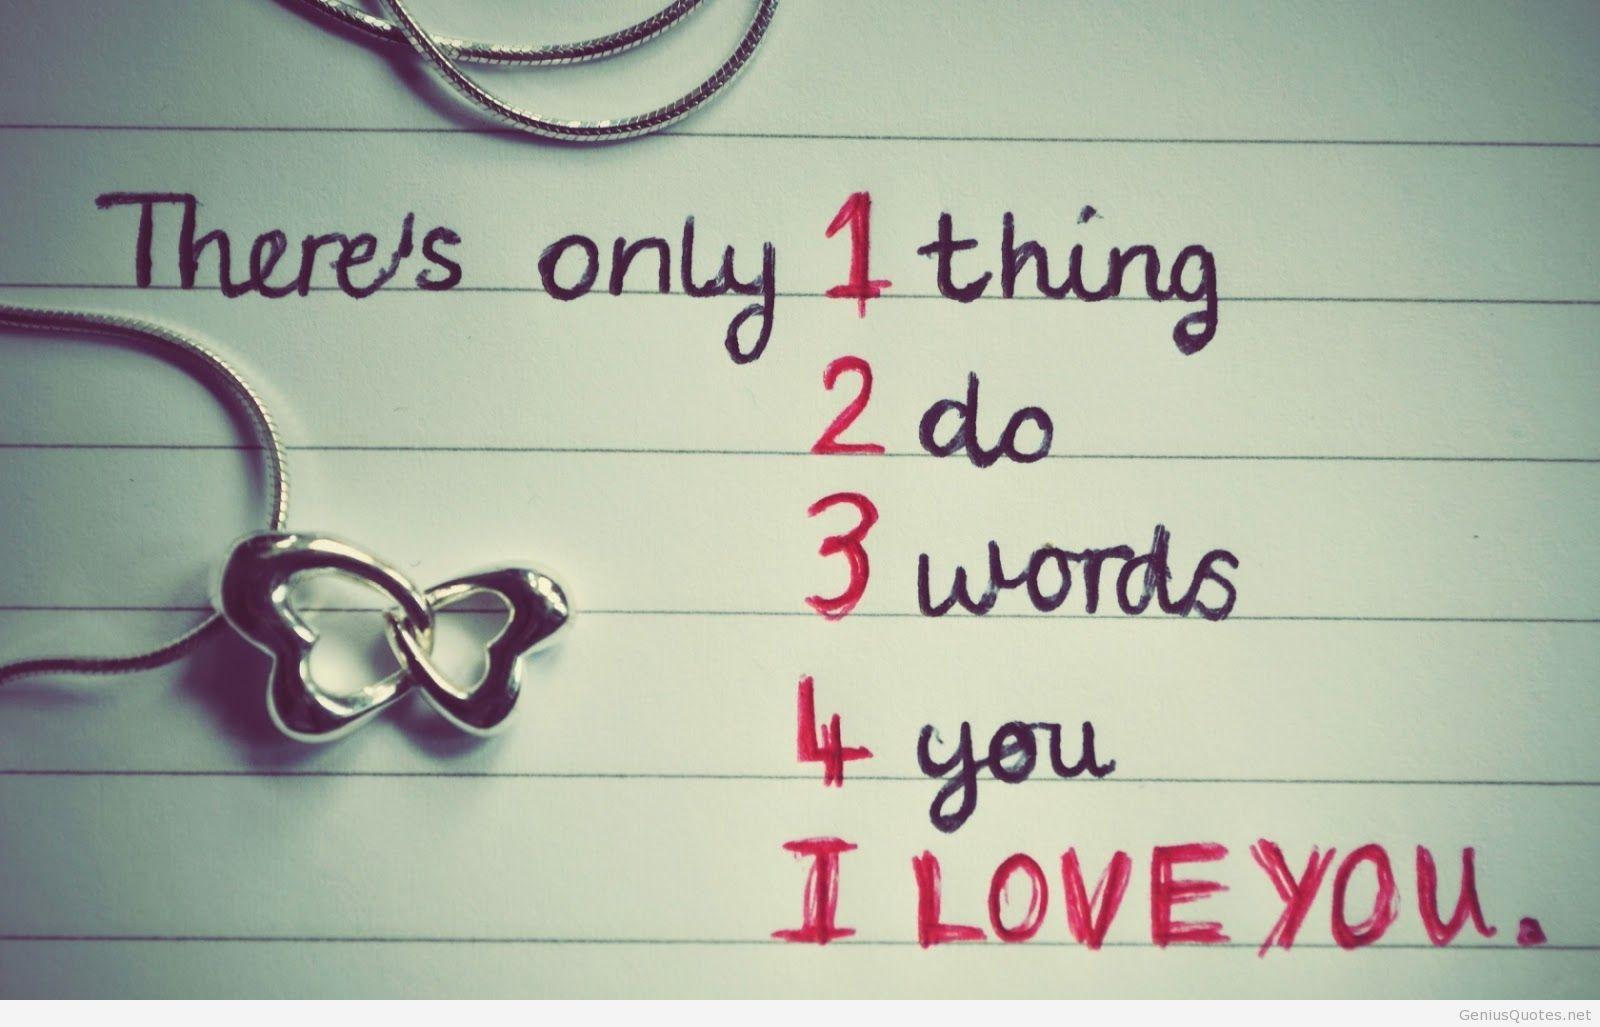 I stlill love you quotes with images and wallpapers